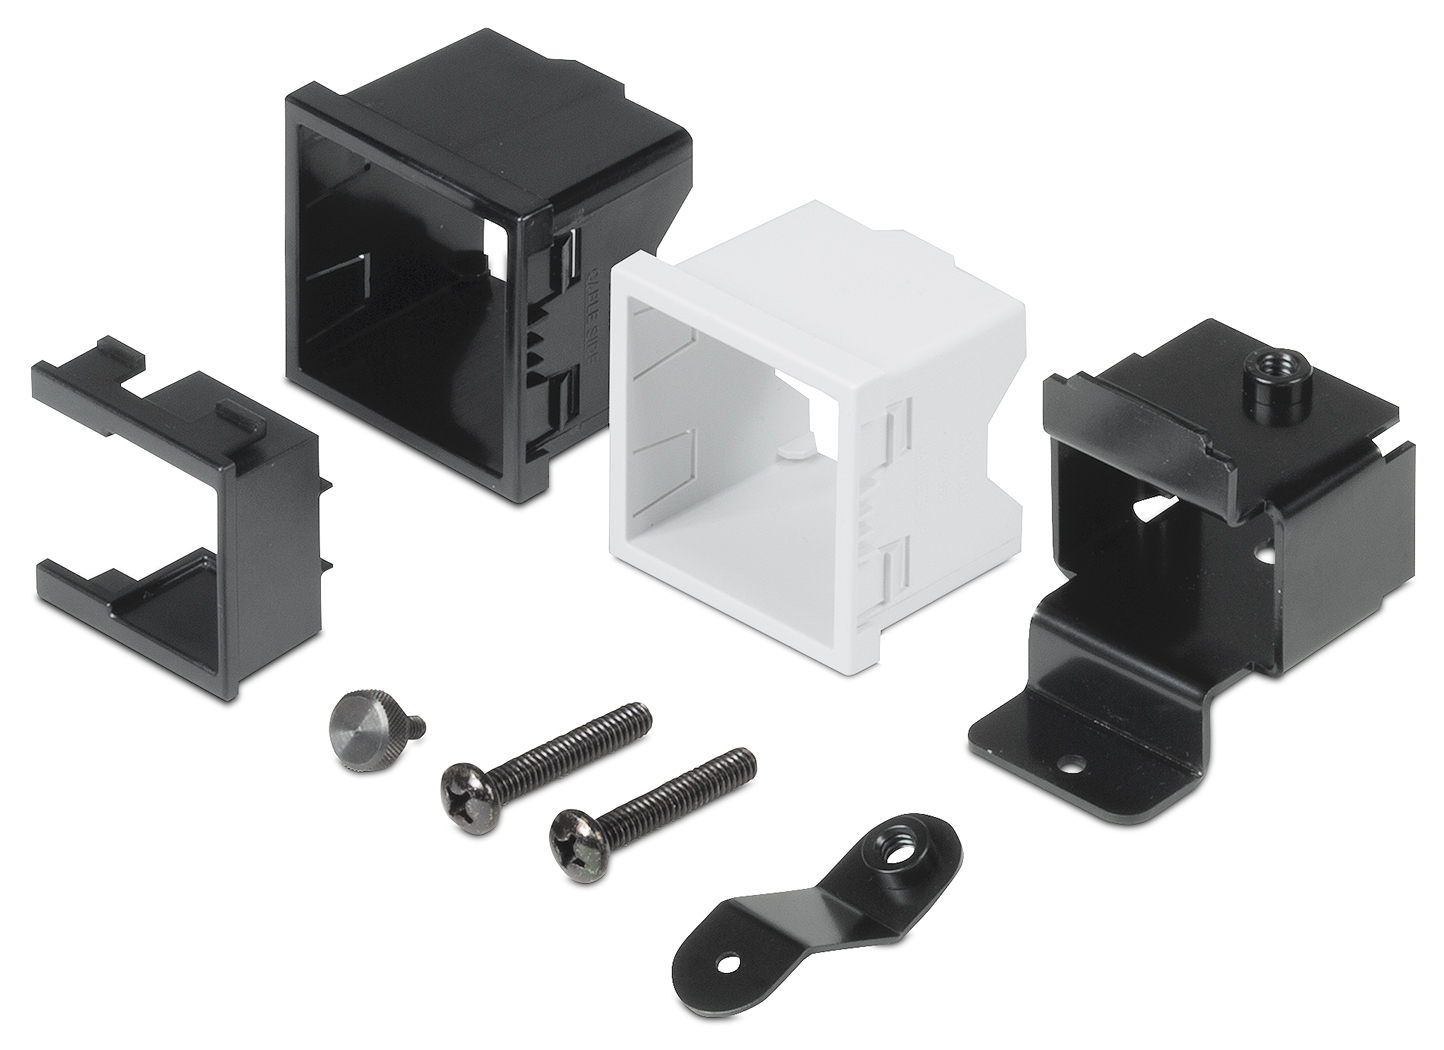 Optional Cable Cubby F55 Retractor Mounting Bracket Kit accommodates one Retractor or Retractor XL module